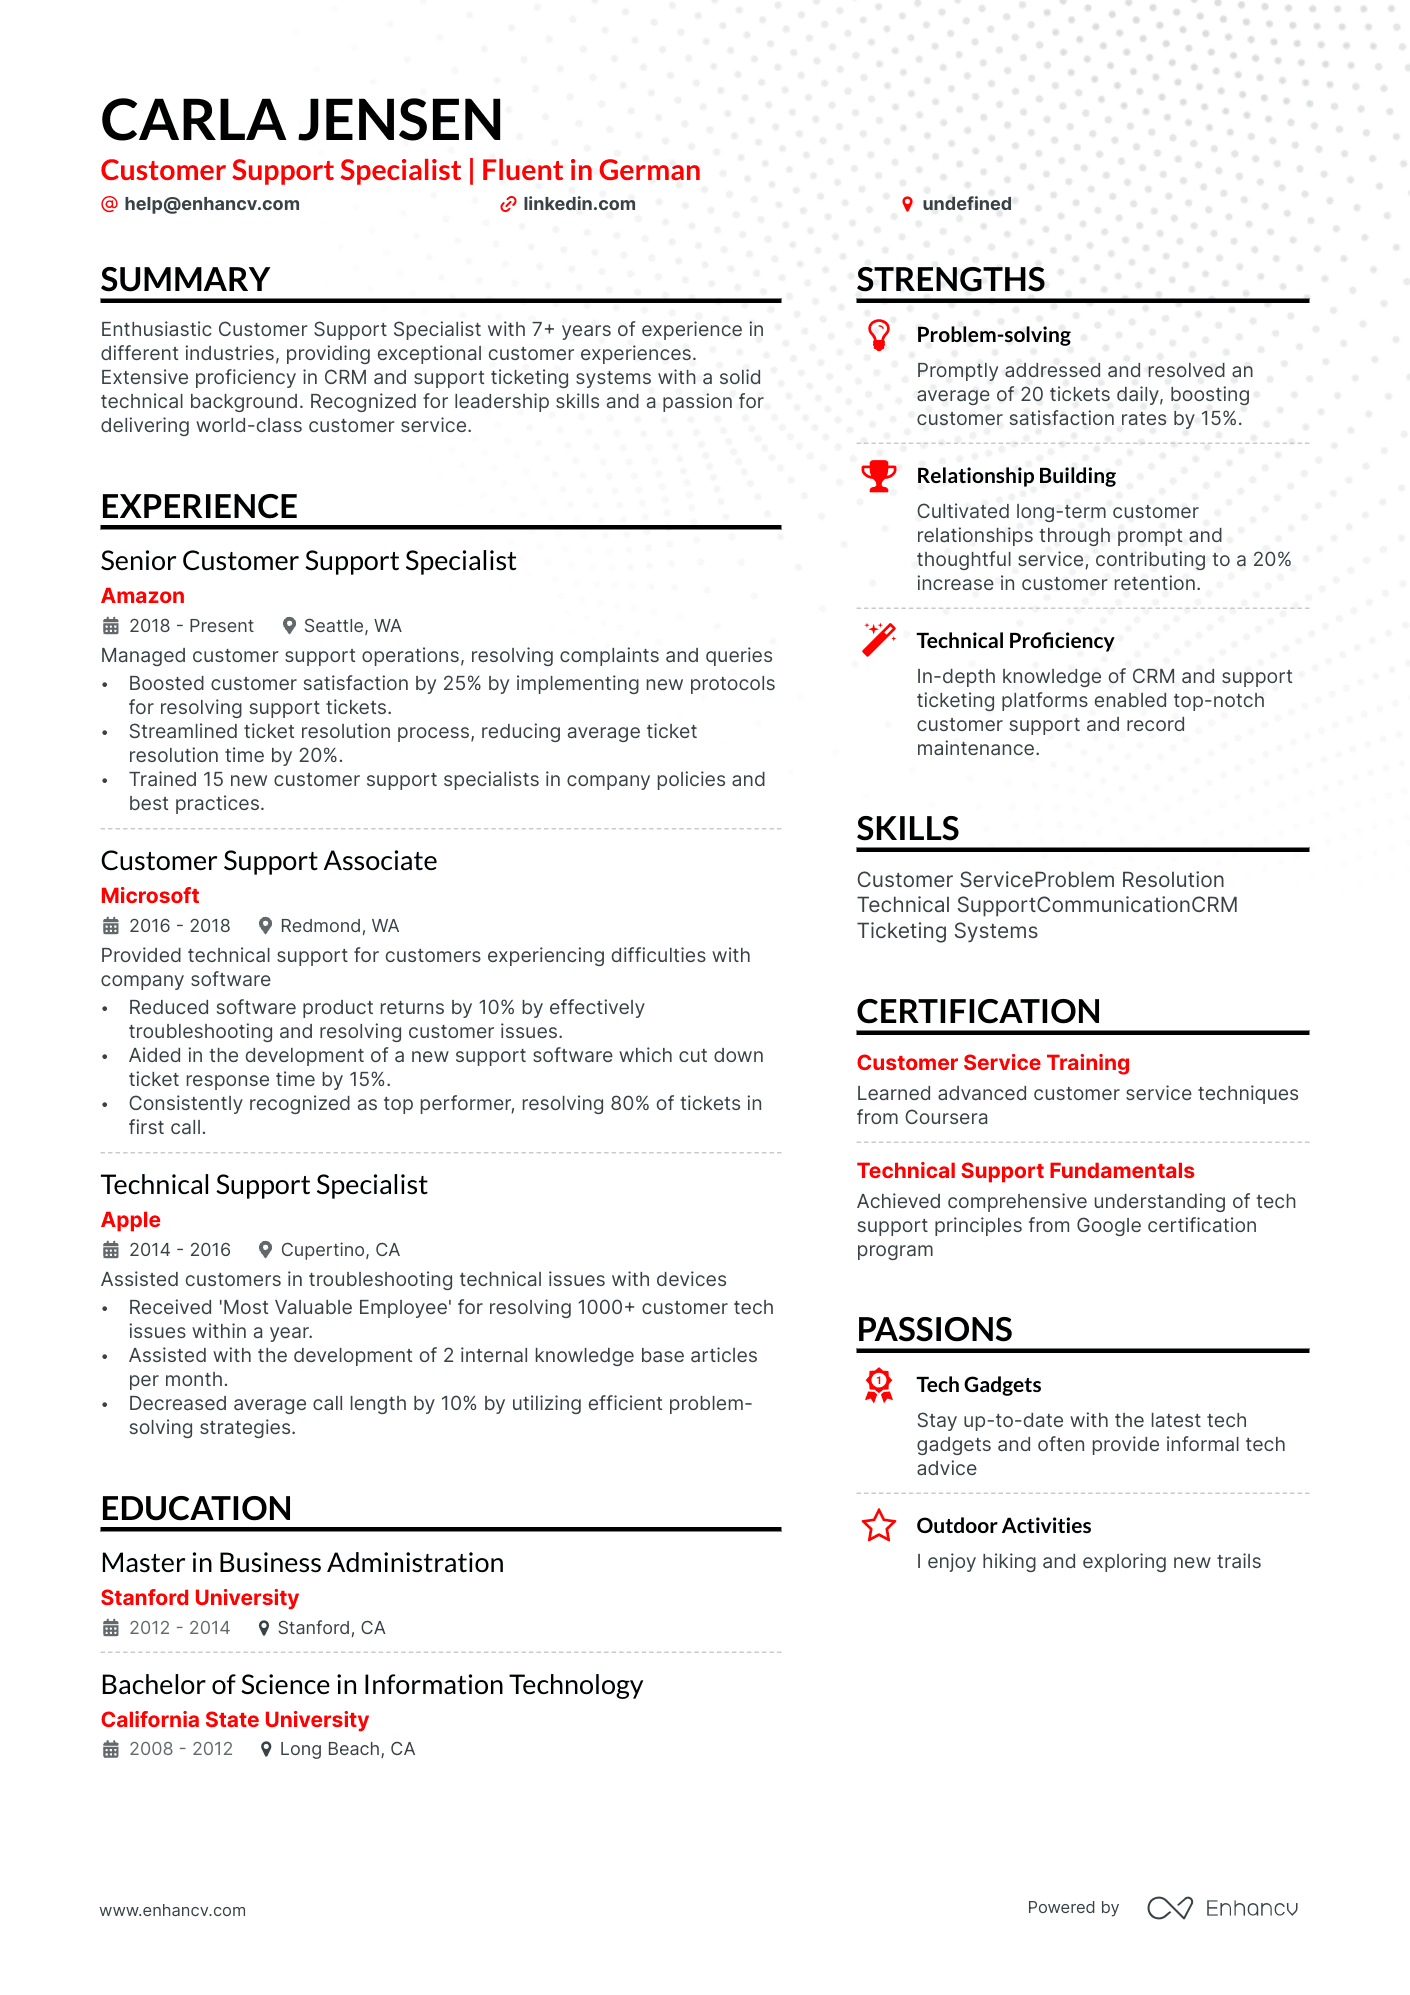 Customer Support Specialist resume example